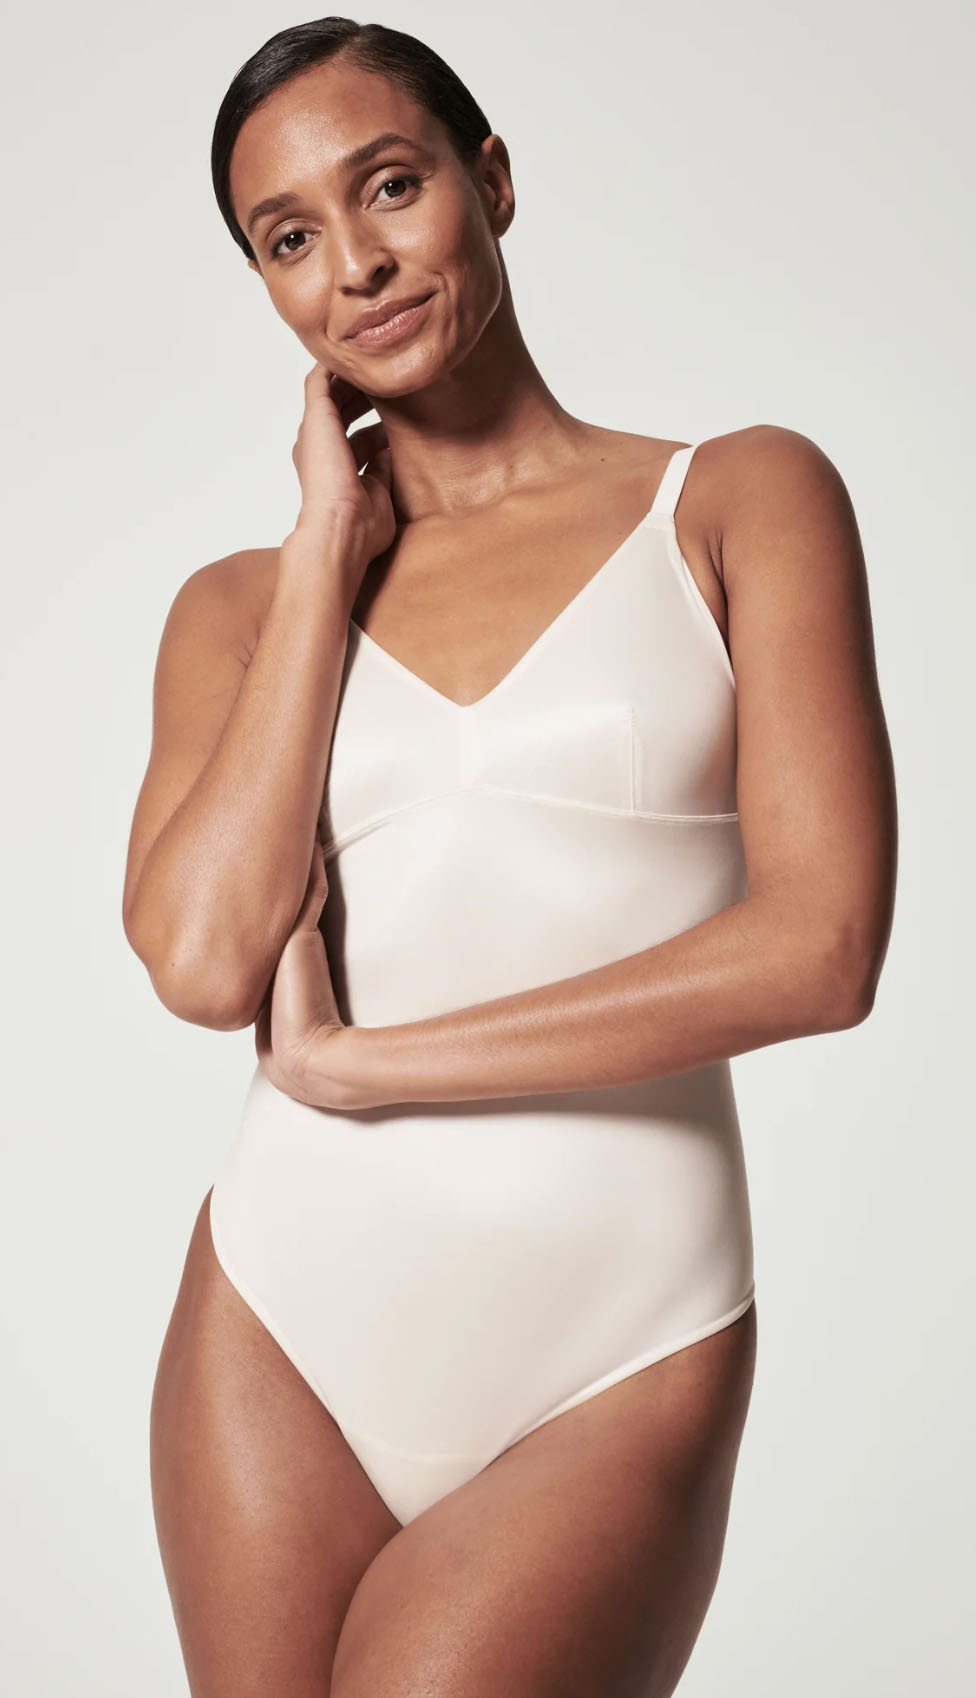 Shop Spanx's End Of Sale For Up to 70% Off Its Best-Selling Styles